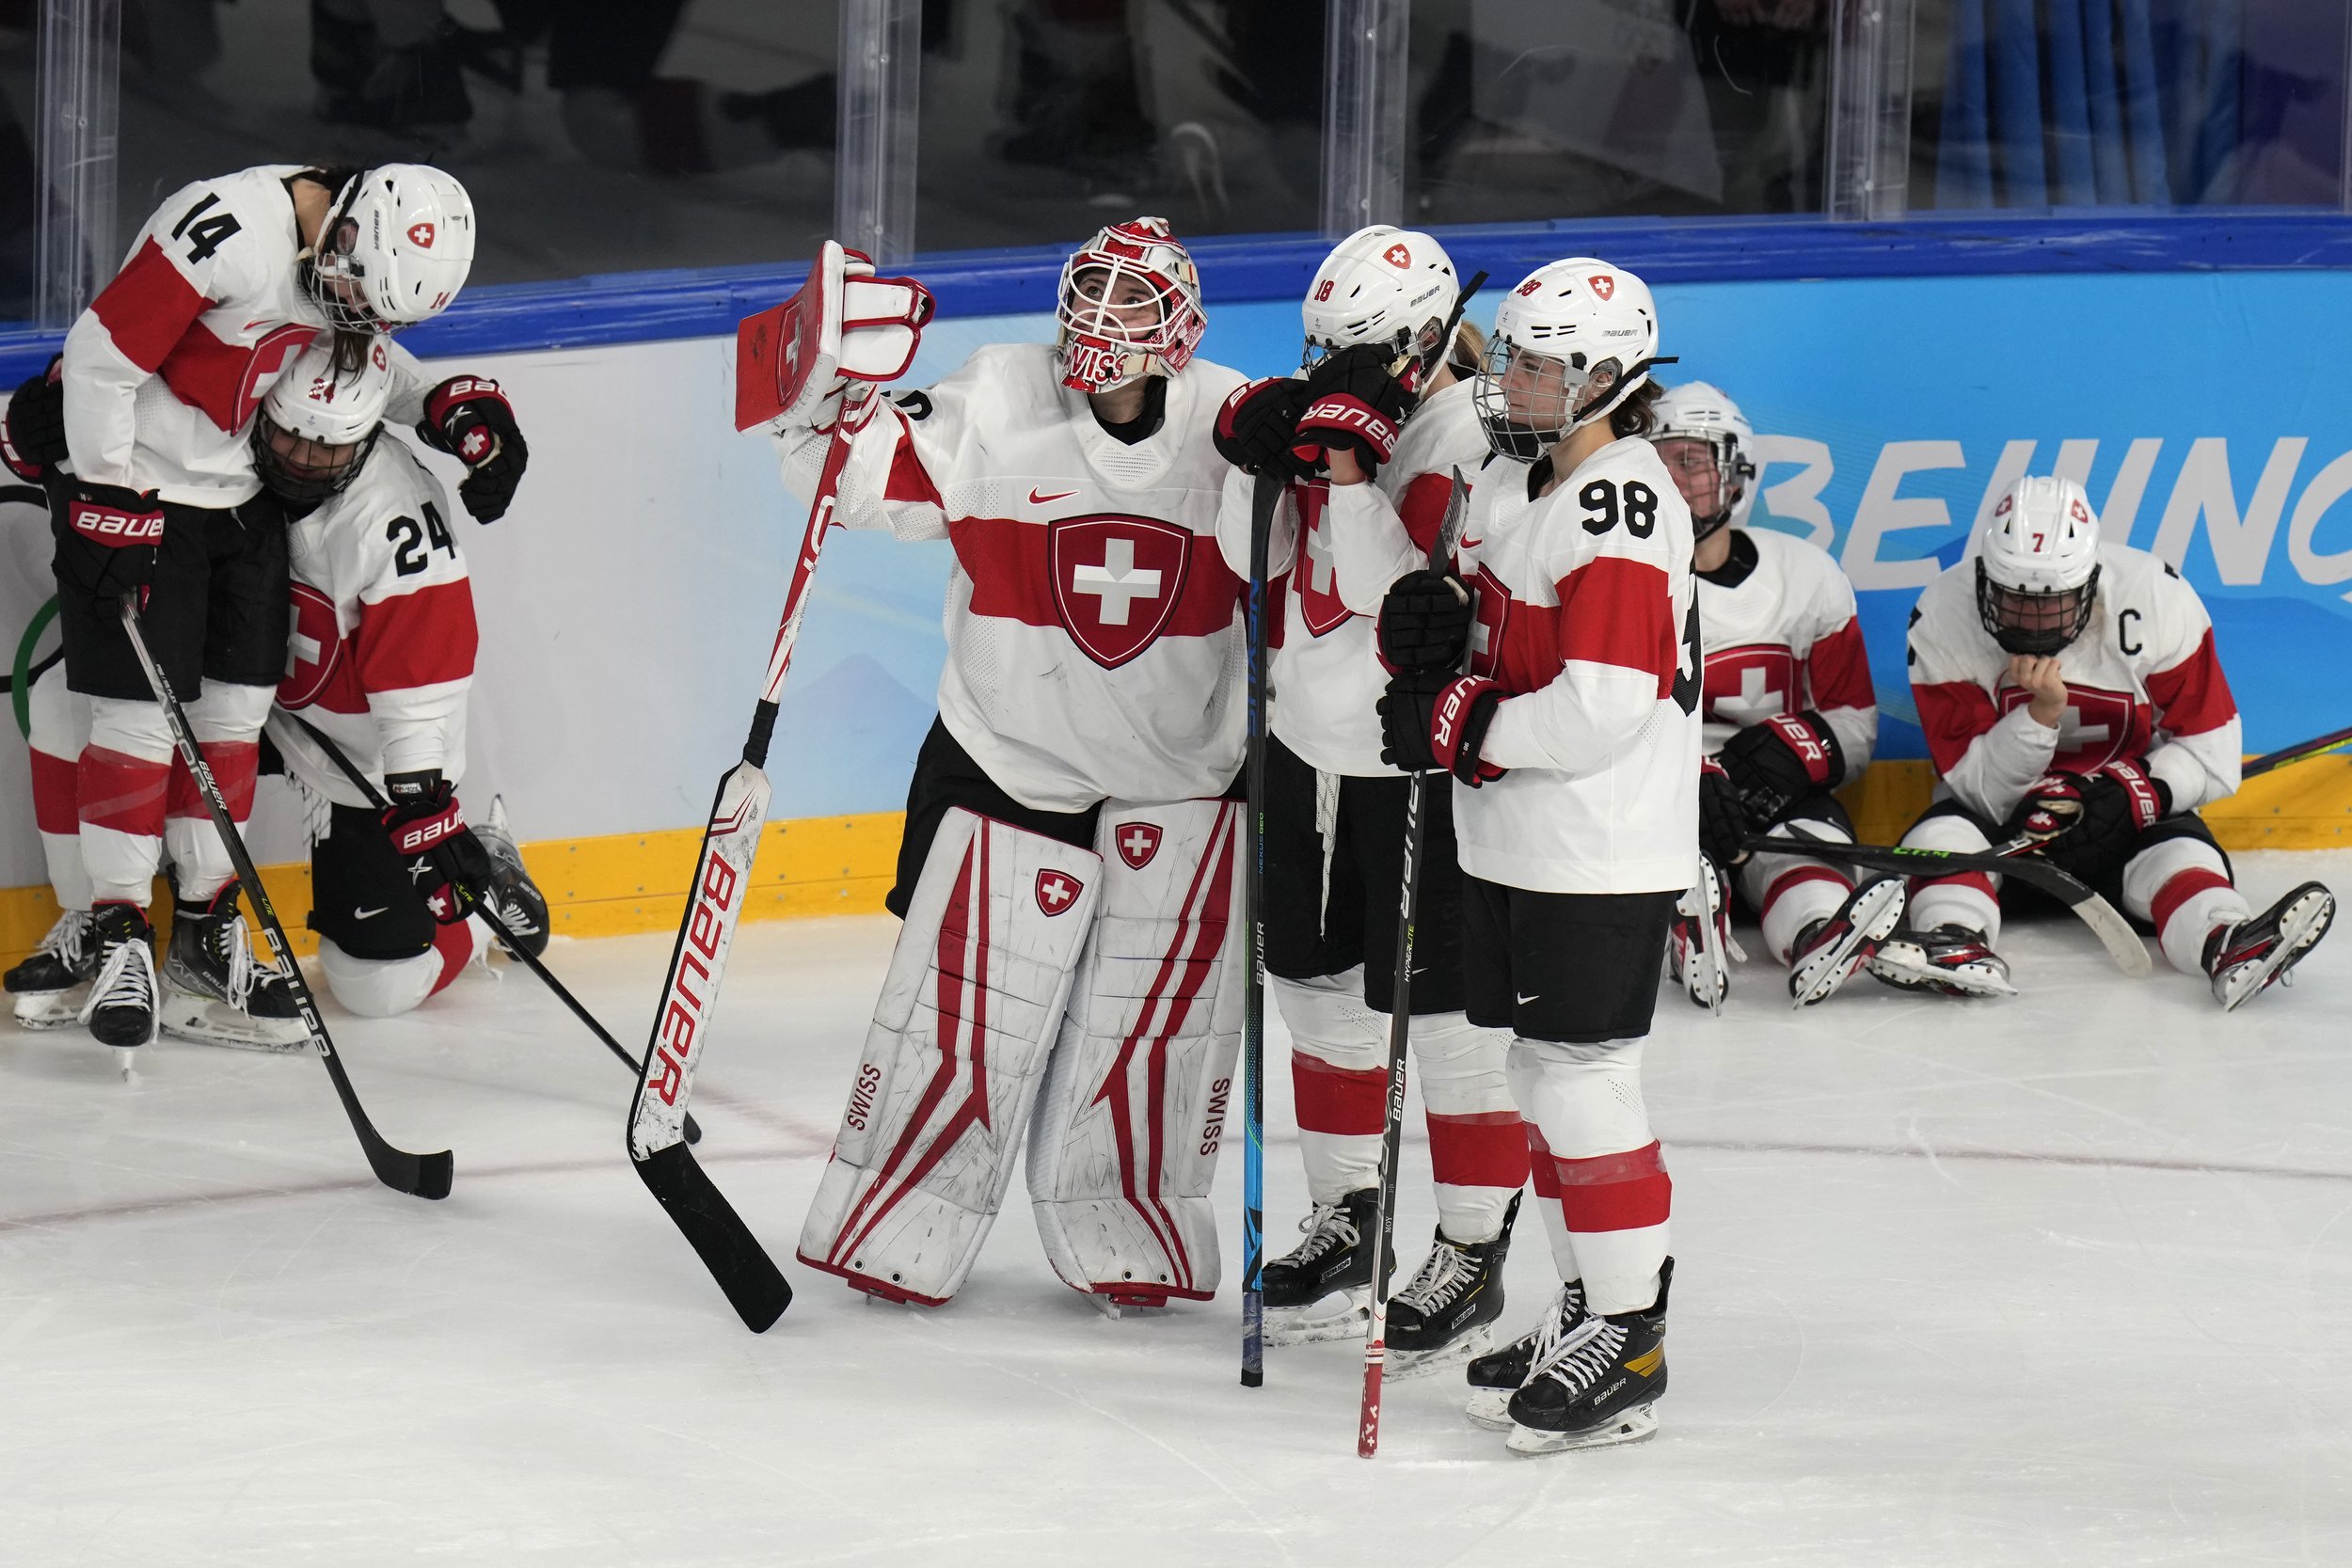  Switzerland reacts after losing to Finland in the women's bronze medal hockey game at the 2022 Winter Olympics, Wednesday, Feb. 16, 2022, in Beijing. (AP Photo/Petr David Josek) 